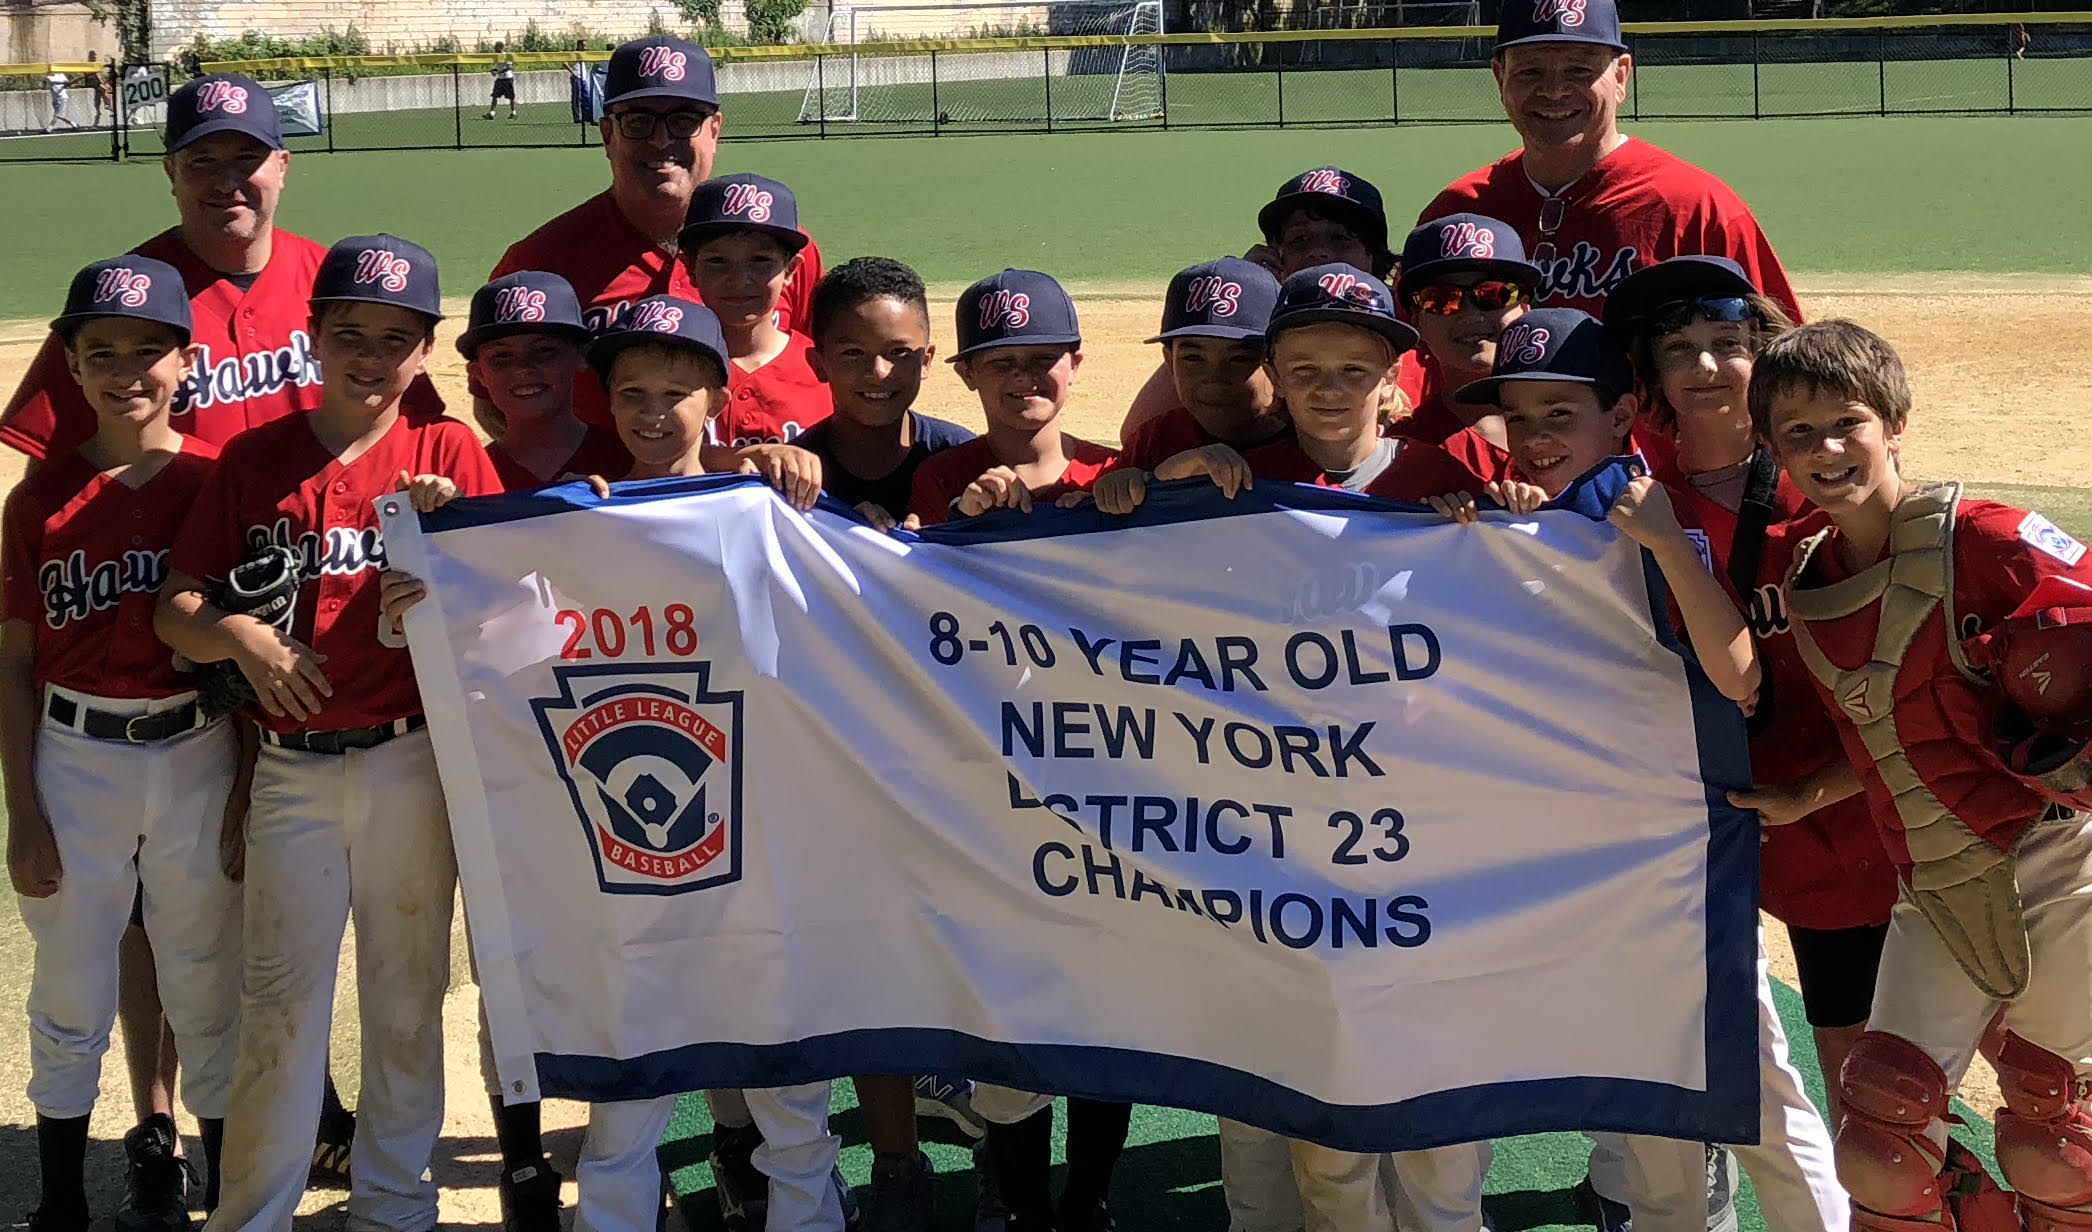 West Side Little League's 10u Tournament Team, The Hawks, WON the 8-10 YEAR OLD NEW YORK 2018 District 23 CHAMPIONSHIP!